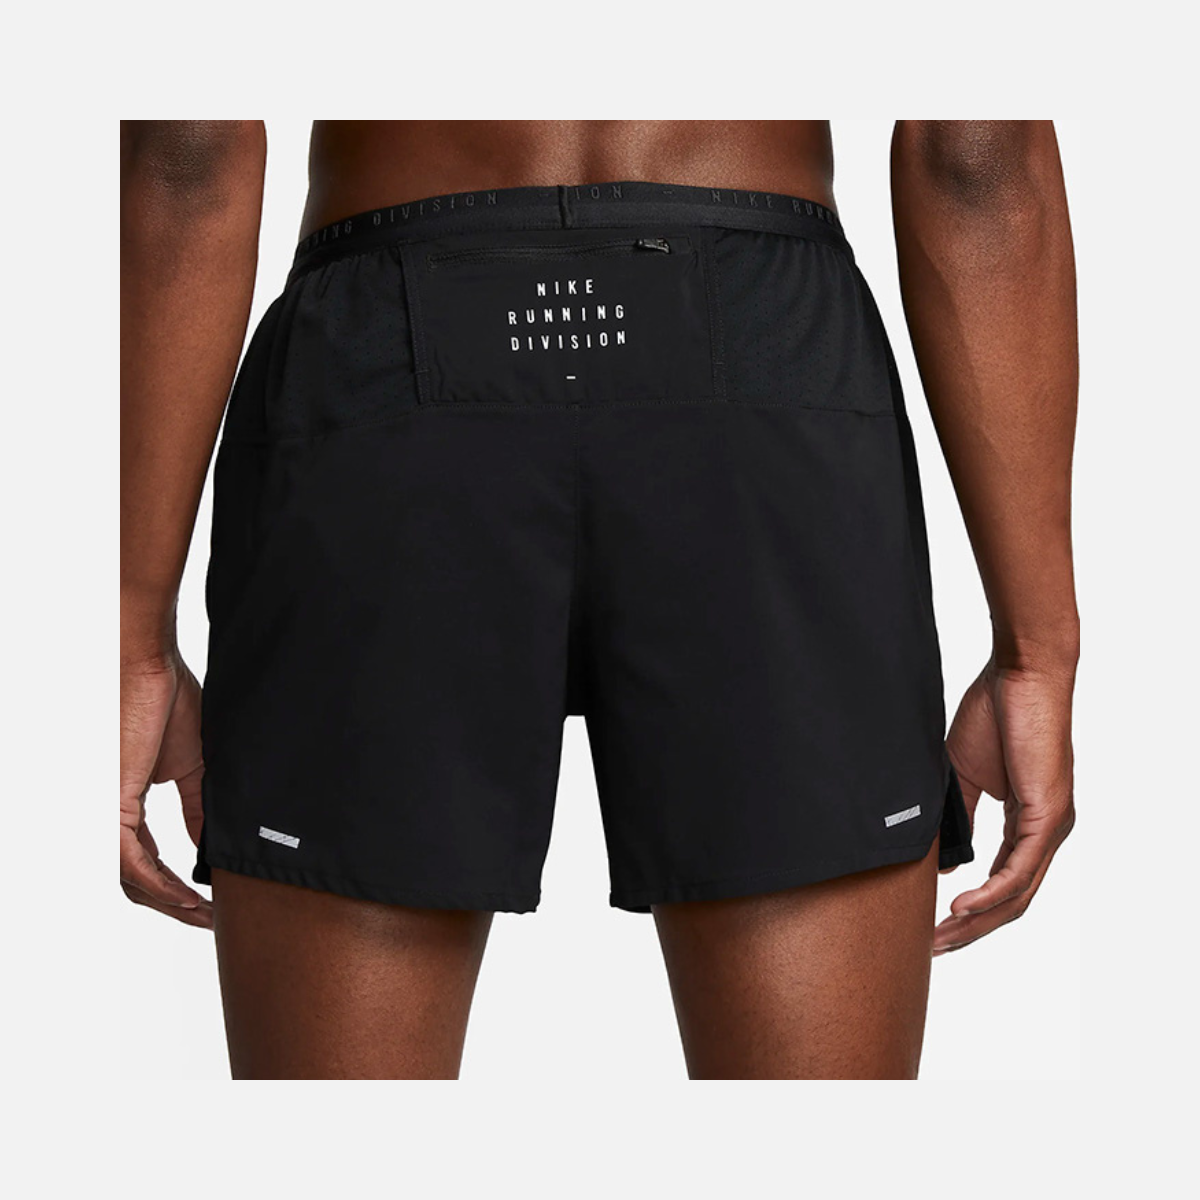 Nike Dri-FIT Stride Run Division Men's 5" Brief-Lined Running Shorts